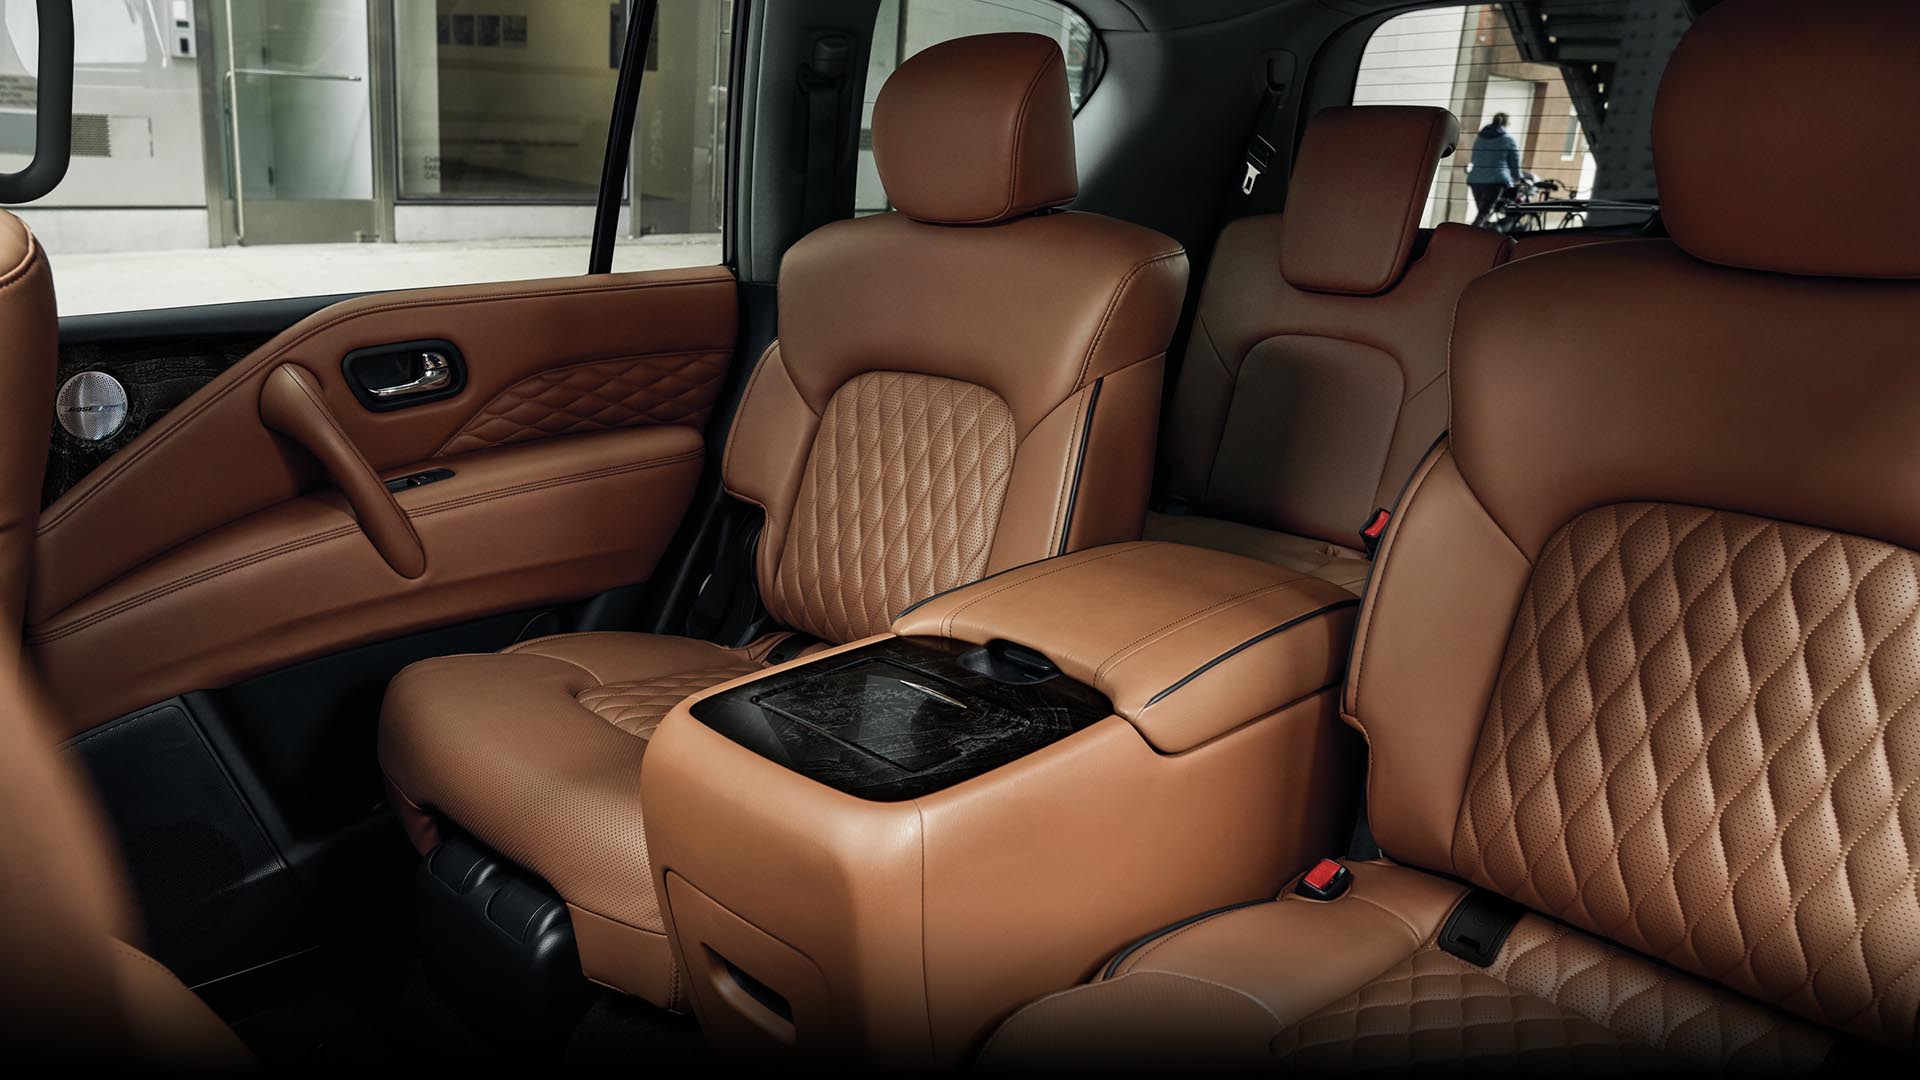 2022 INFINITI QX80 SUV second row leather seating.